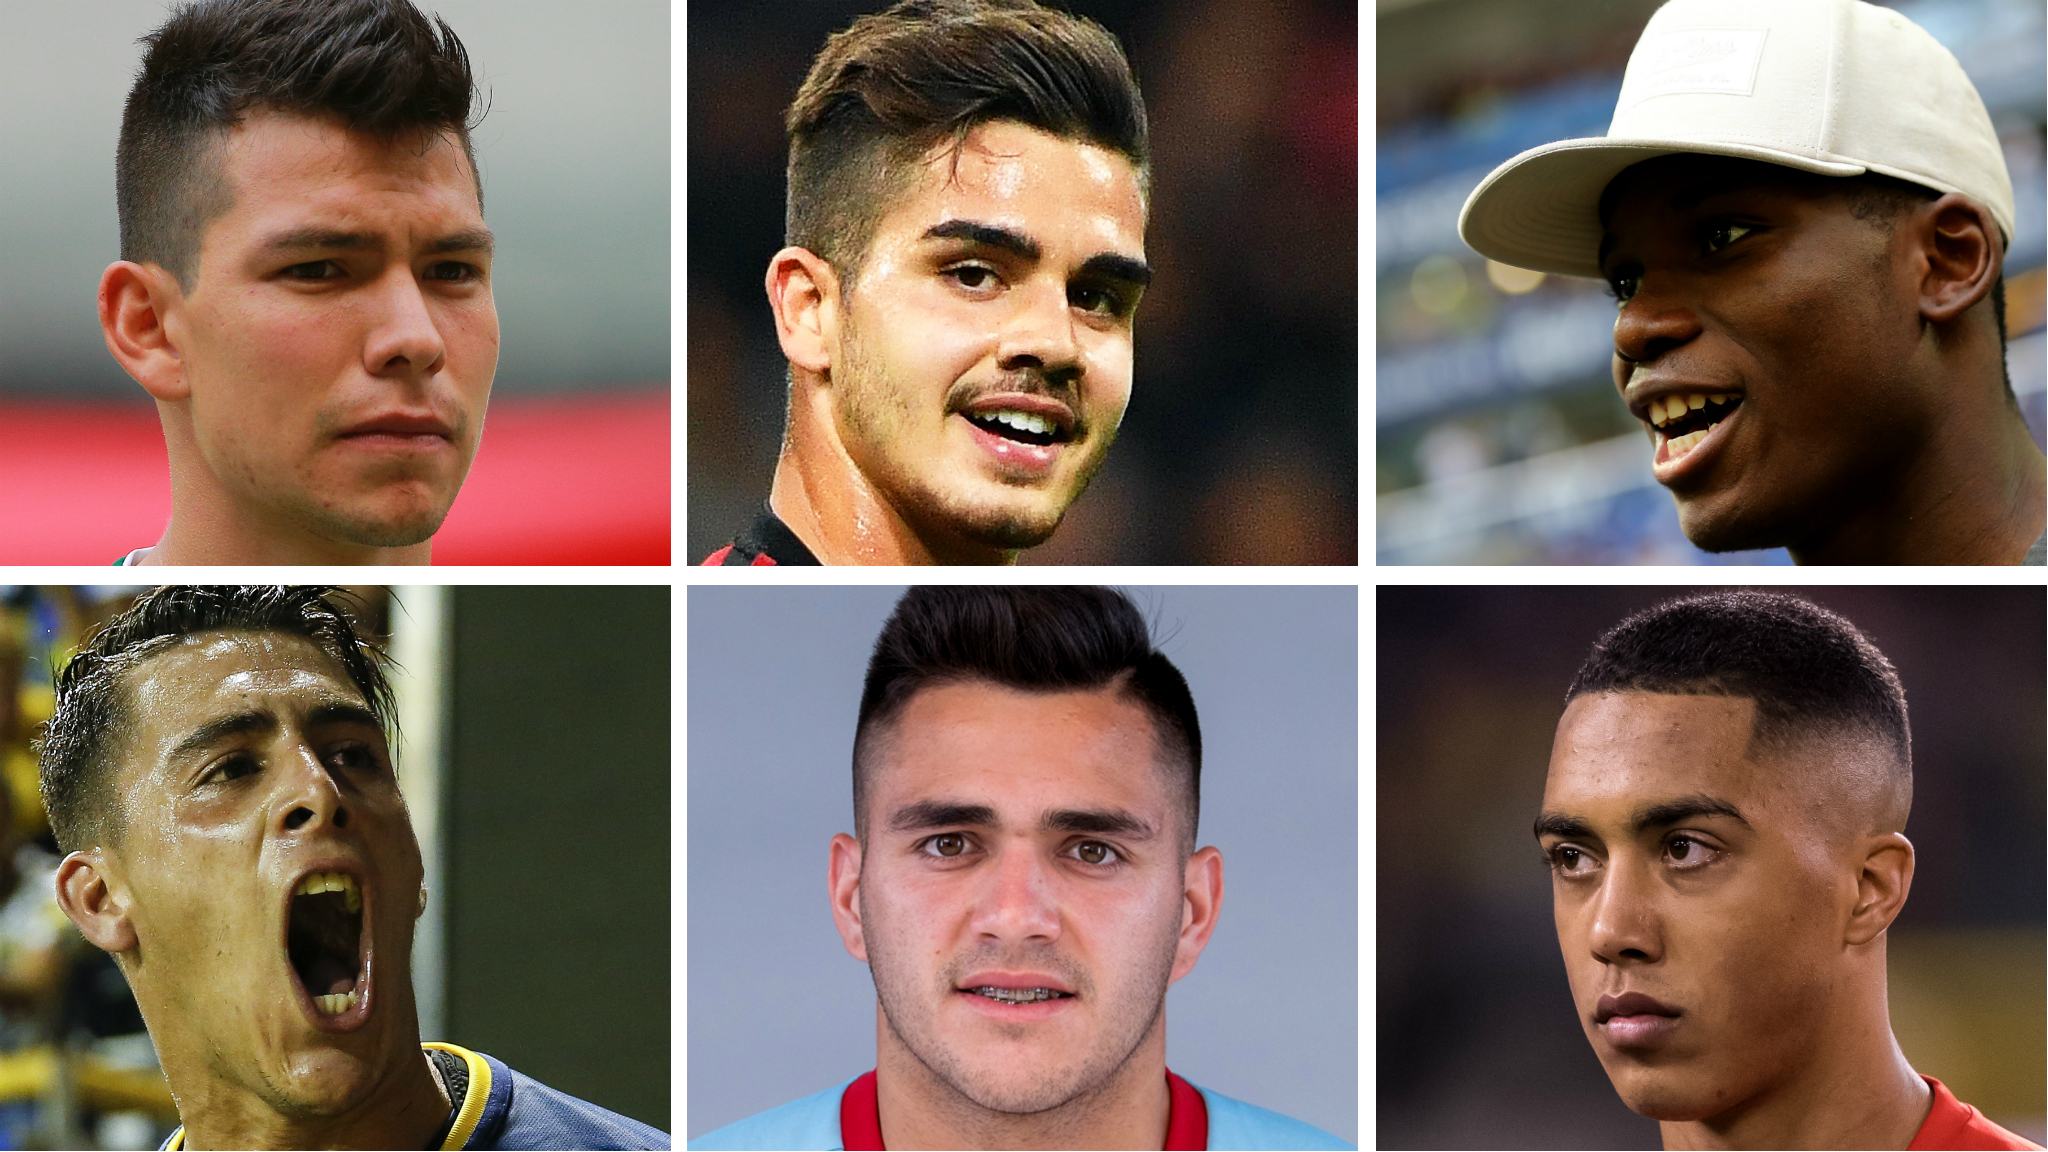 'El Chucky', 'The Sergeant' & 'The Bull' - the youngsters to watch at the World Cup